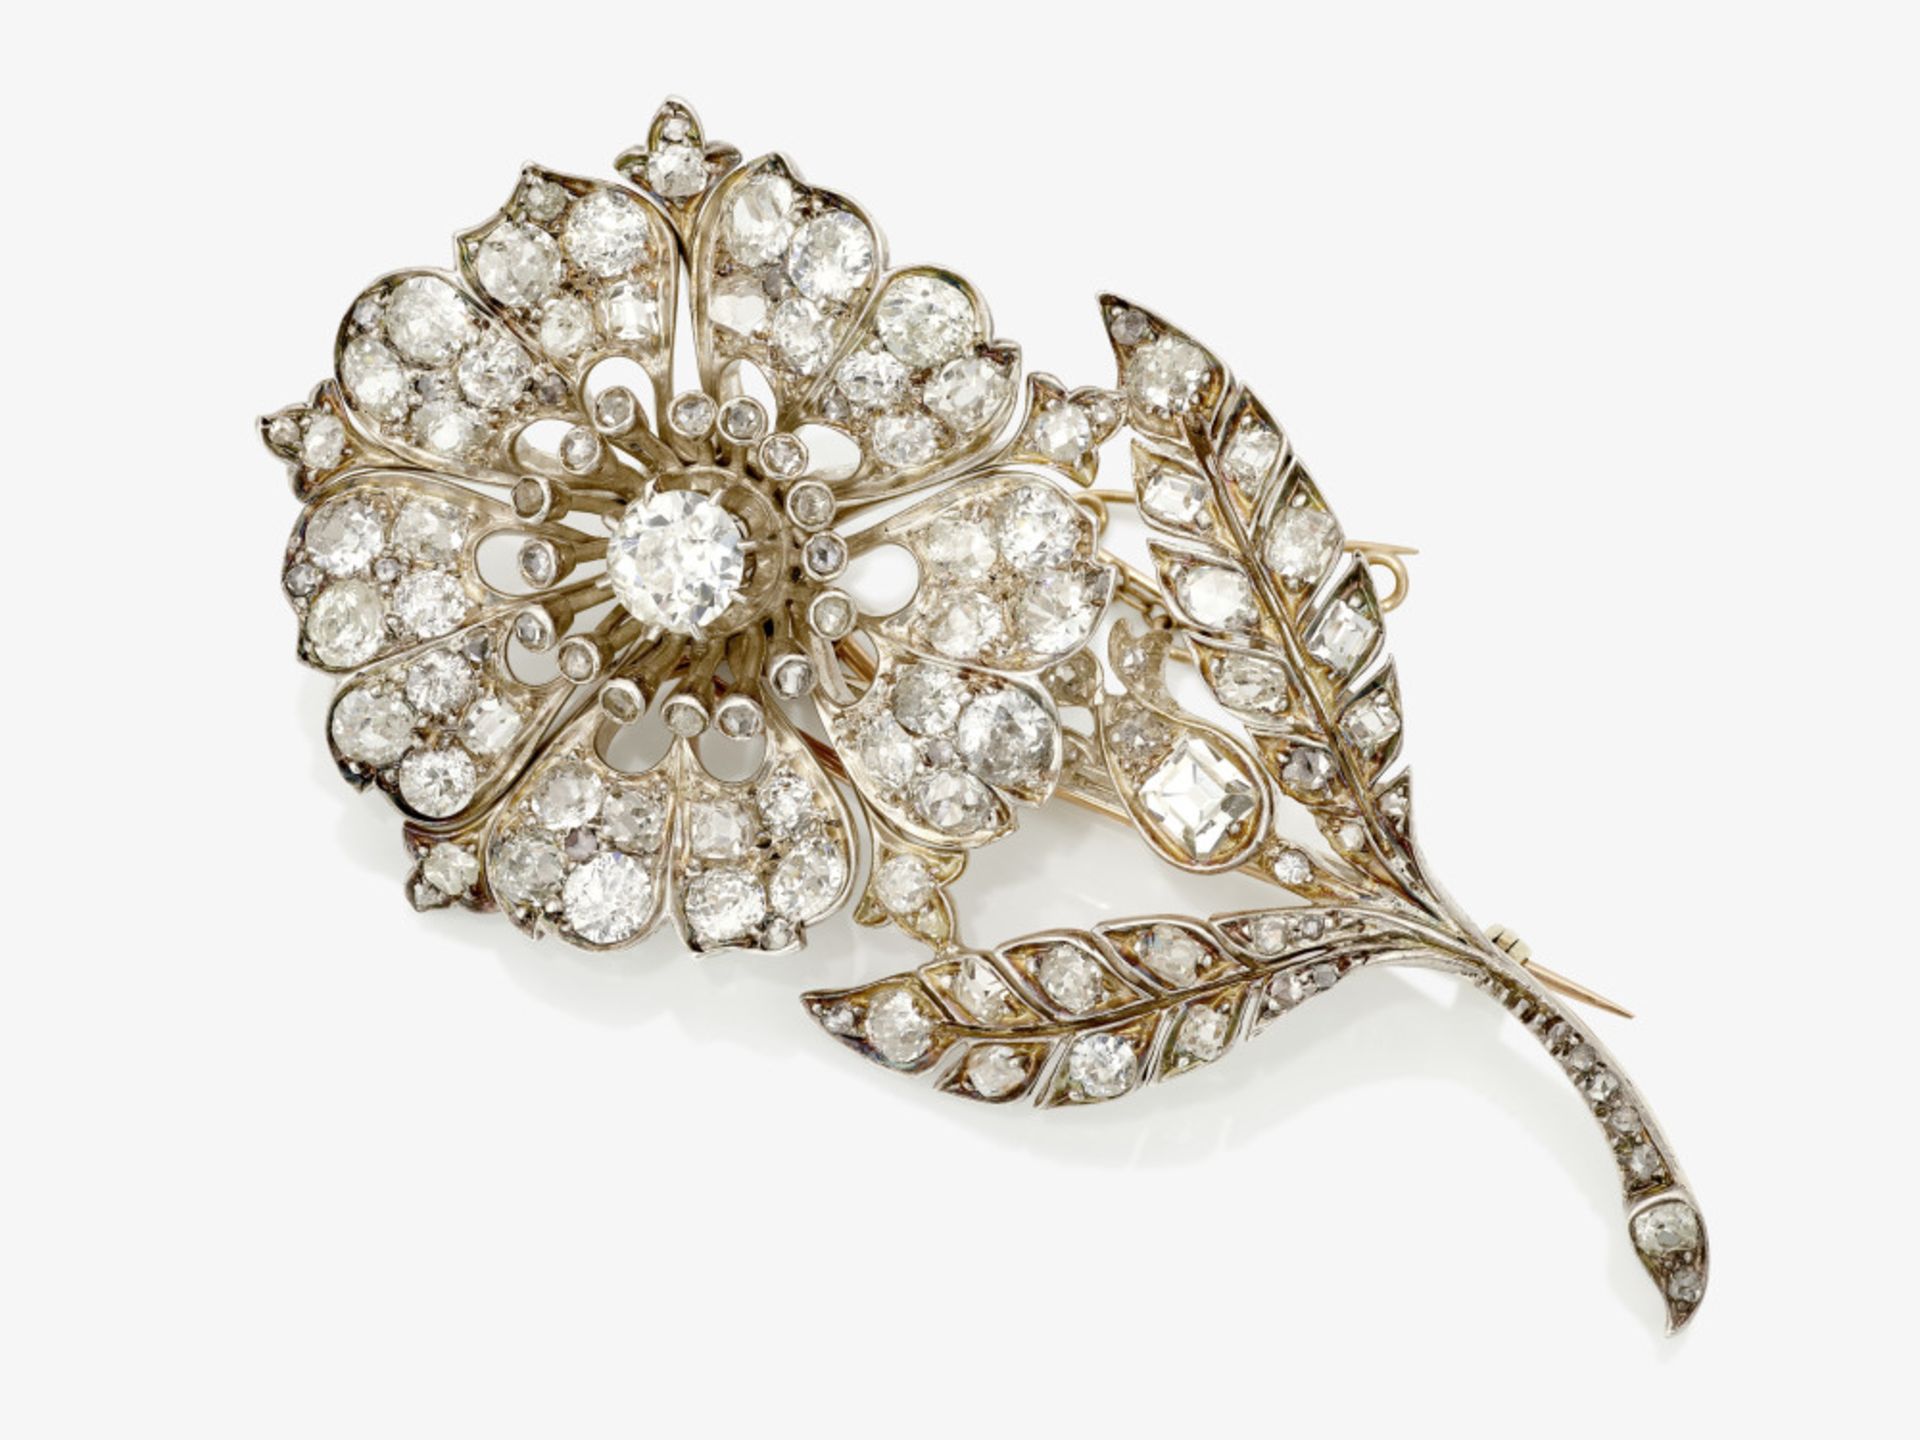 A brooch in the shape of a large flower